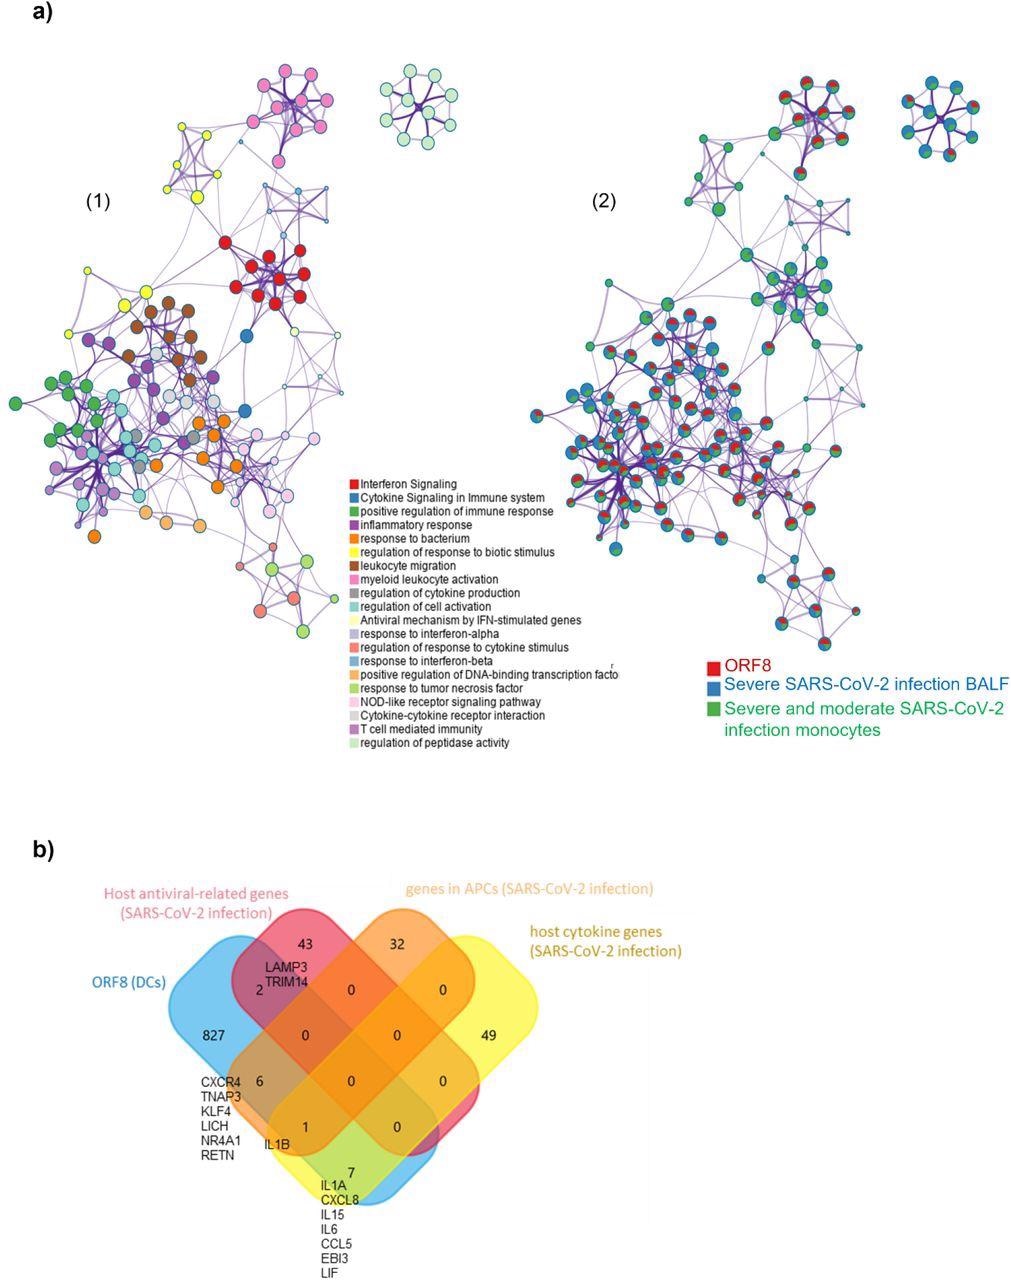 ORF8 induces an inflammatory mRNA profile involved in SARS-CoV-2 infection a) 1) Network Layout of enriched pathways where each term is represented by a circle node, where its size is proportional to the number of input genes that fall into that term, and its color represents its cluster identity (i.e., nodes of the same color belong to the same cluster). Terms with a similarity score > 0.3 are linked by an edge (the thickness of the edge represents the similarity score). The network is visualized with Cytoscape (v3.1.2) with “force-directed” layout and with edge bundled for clarity. 2) The same enrichment network has its nodes displayed as pies. Each pie sector is proportional to the number of hits originated from the analyzed gene list. The Colour code for the pie sector represents the amount of genes of each list and is consistent with the colors of the figure legend www.metascape.org/COVID. b) Venn plot comparison of detected genes in the ORF8 data set in comparison to published datasets (host antiviral-related genes/host cytokine genes; genes in APCs ).